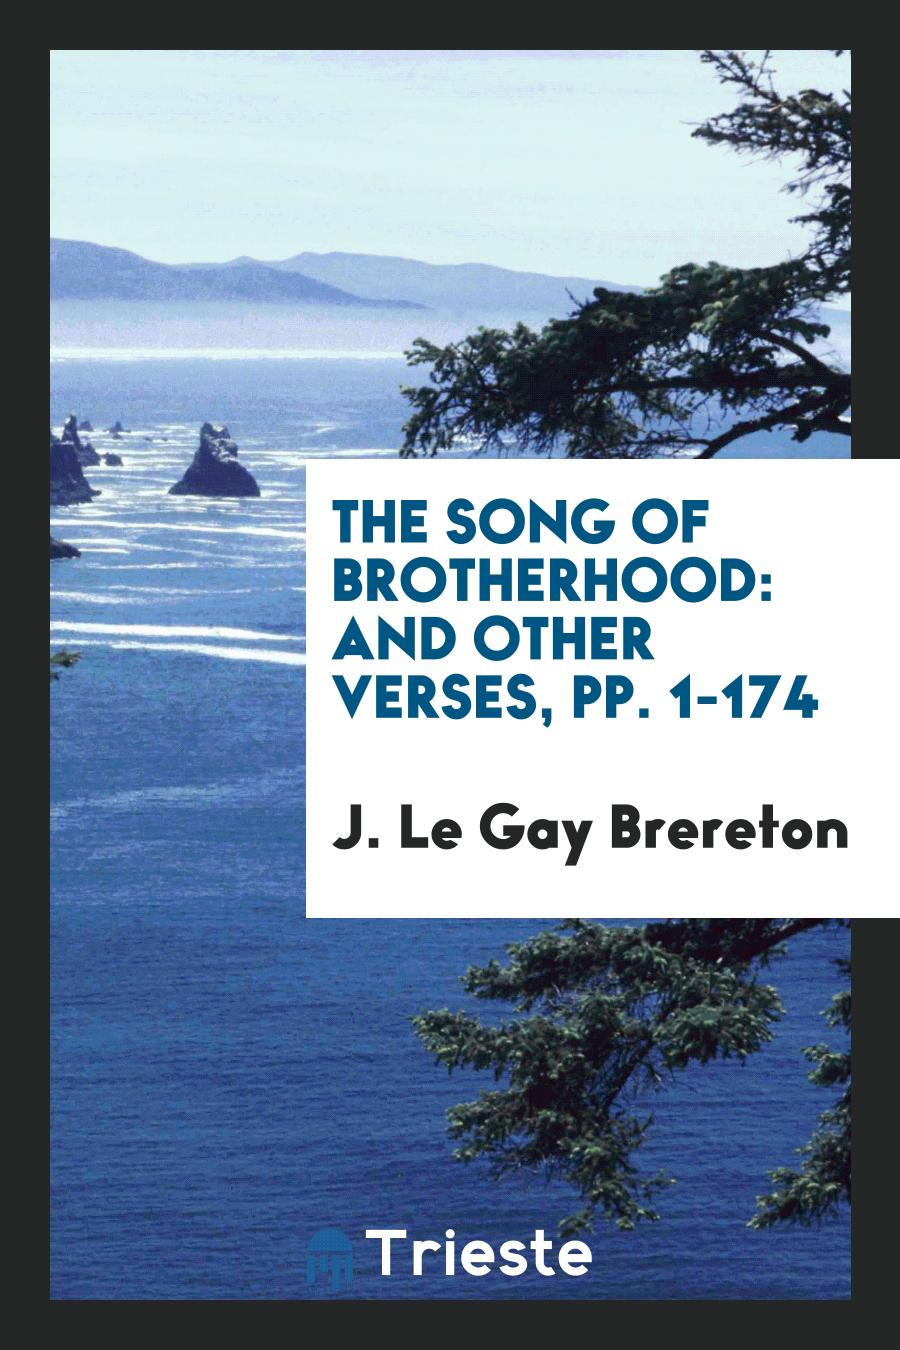 The Song of Brotherhood: And Other Verses, pp. 1-174